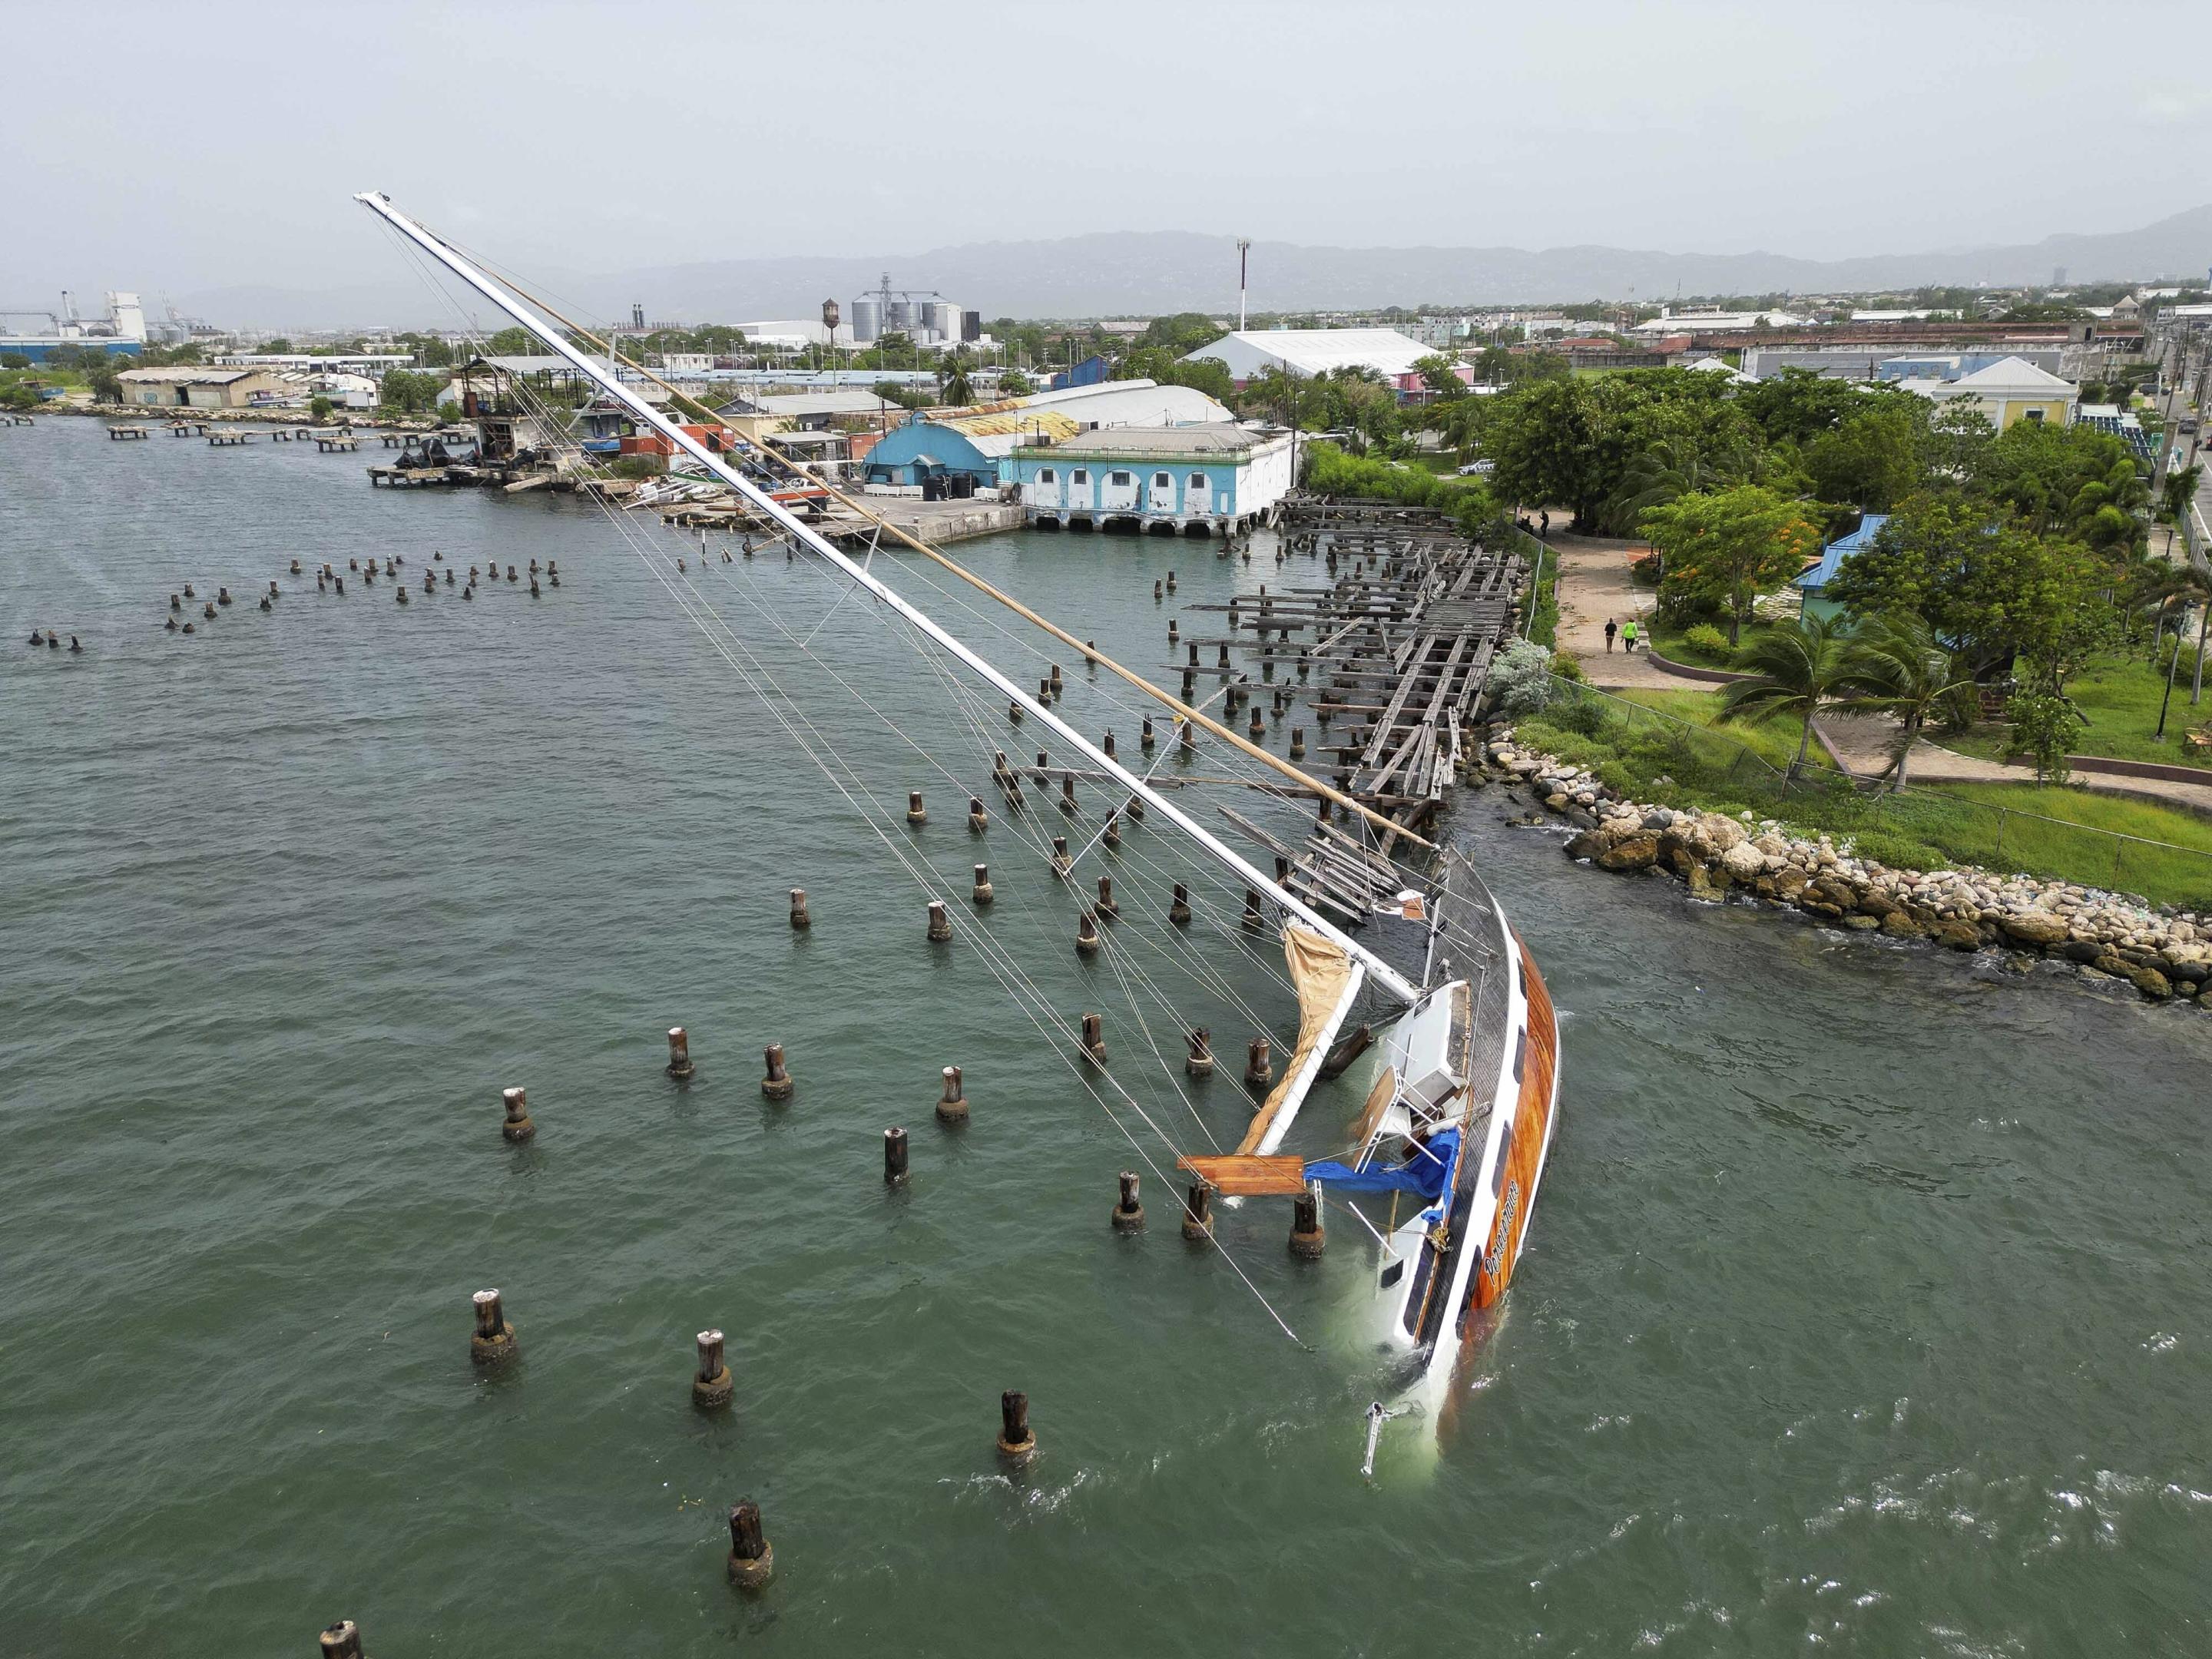 A sailboat damaged by Hurricane Beryl lies on its side in Kingston, Jamaica.